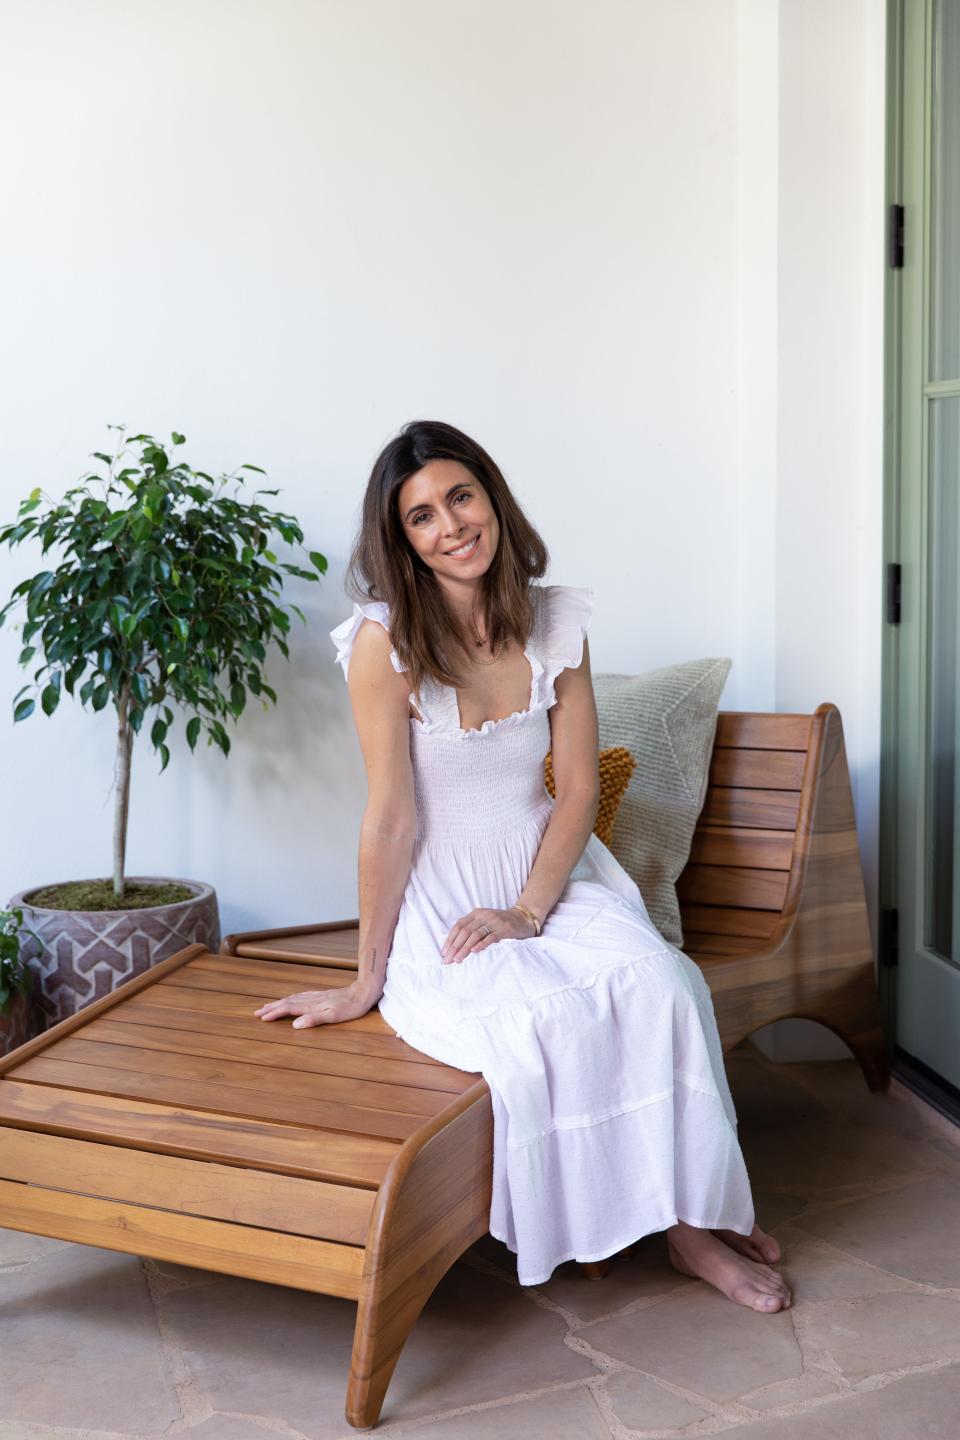 Jamie-Lynn Sigler said she initially felt shame around her RMS diagnosis, but over time she learned to find her voice and self-worth.